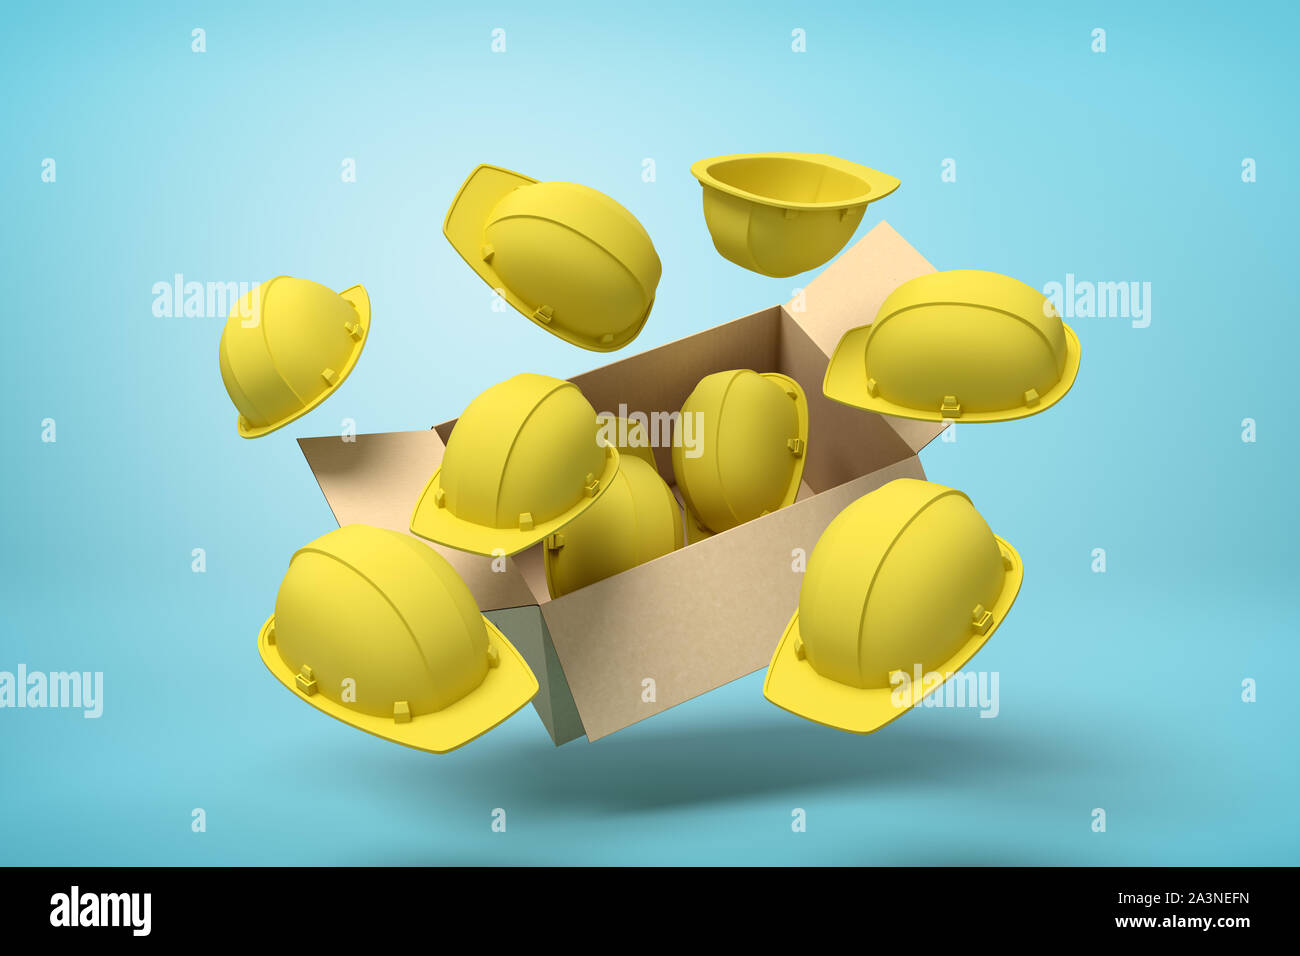 3d rendering of open cardboard box suspended in air with yellow hard hats flying out and around on light-blue background. Stock Photo